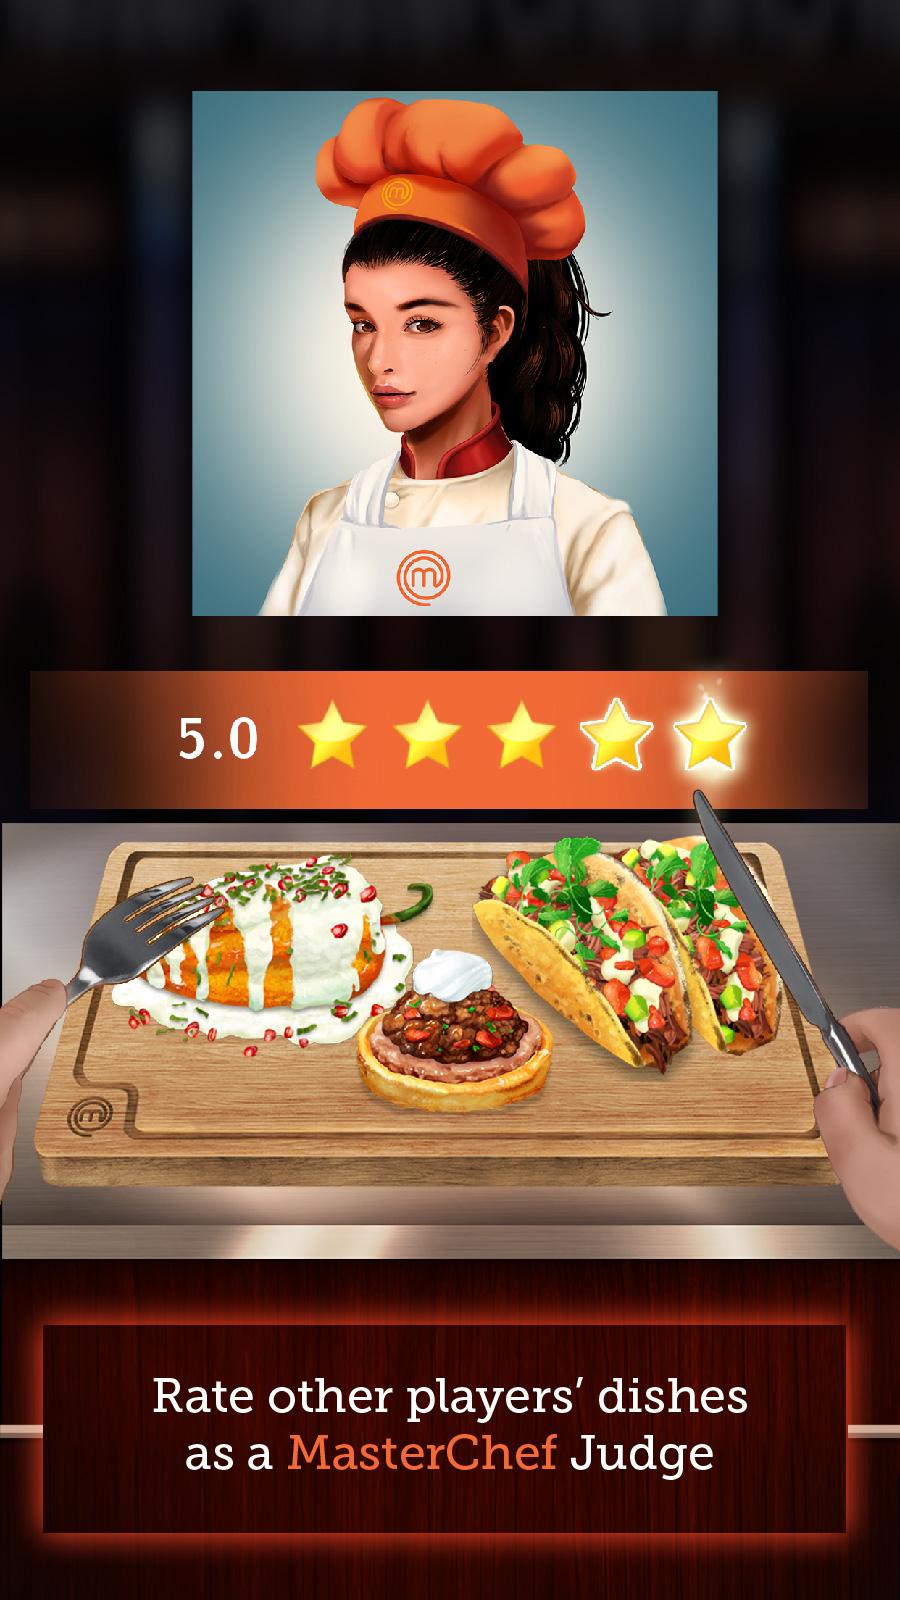 MasterChef: Dream Plate (Food Plating Design Game) for Android